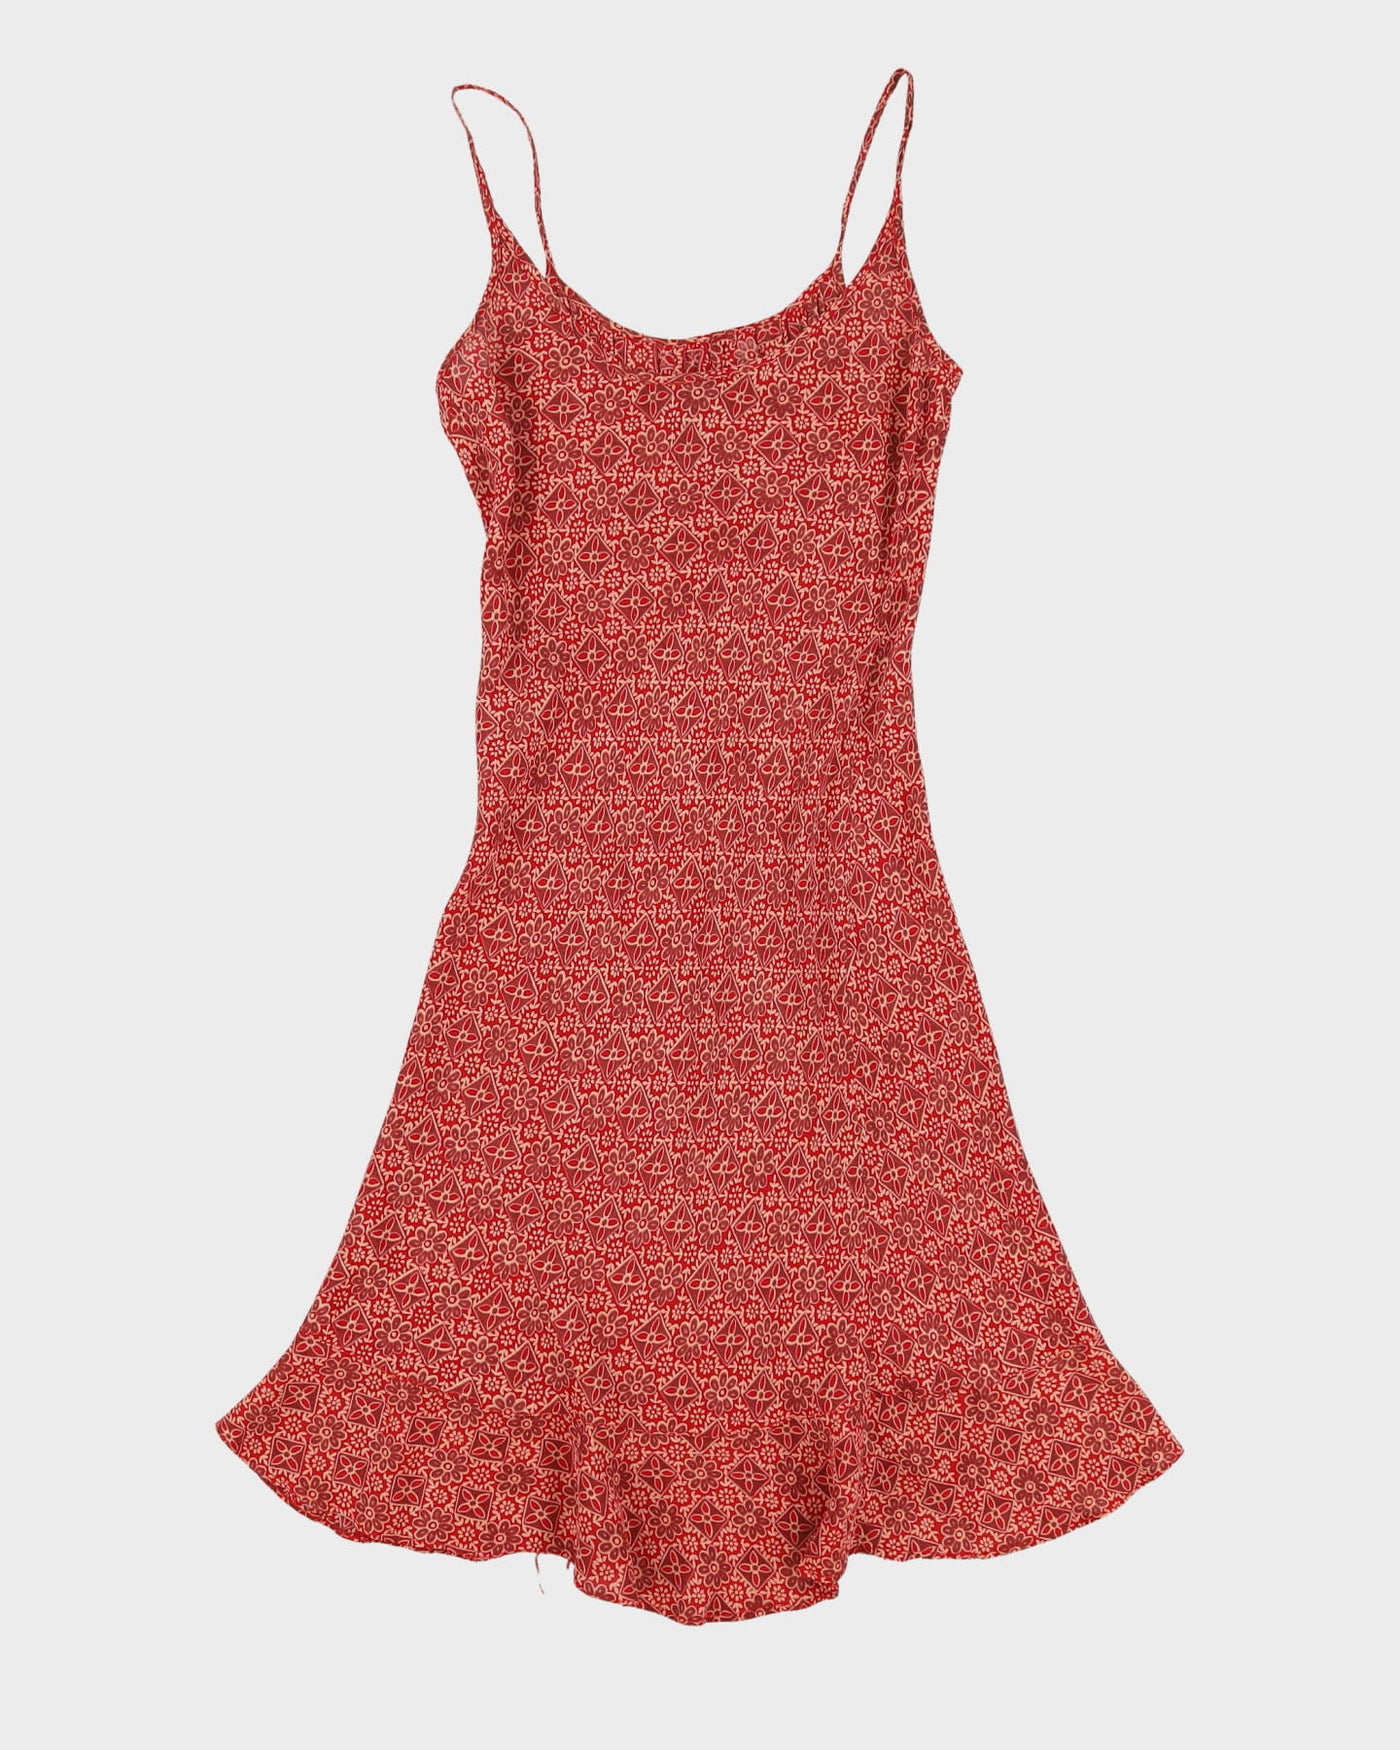 Red Patterned Sleeveless Dress - S